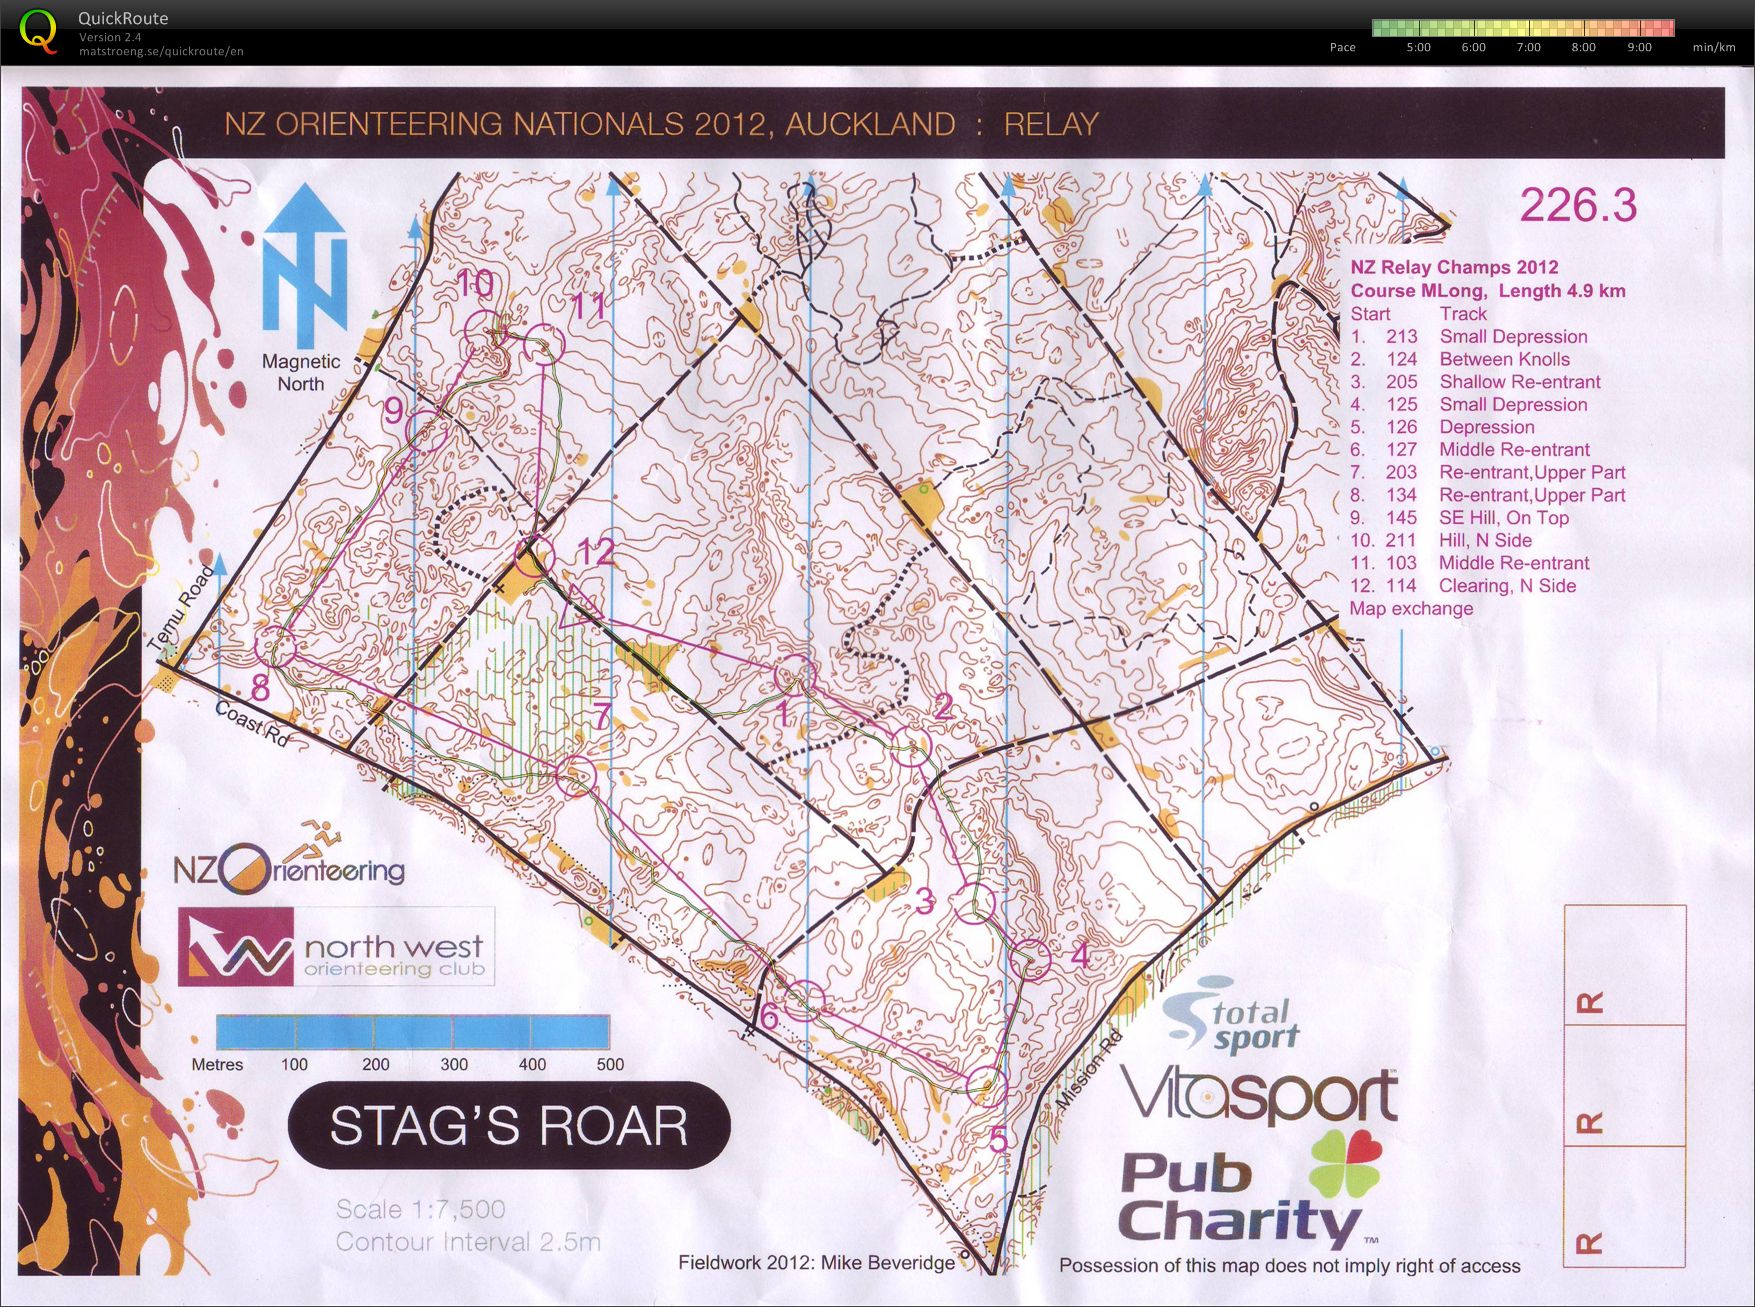 Nationals Relay, map 1 (08.04.2012)